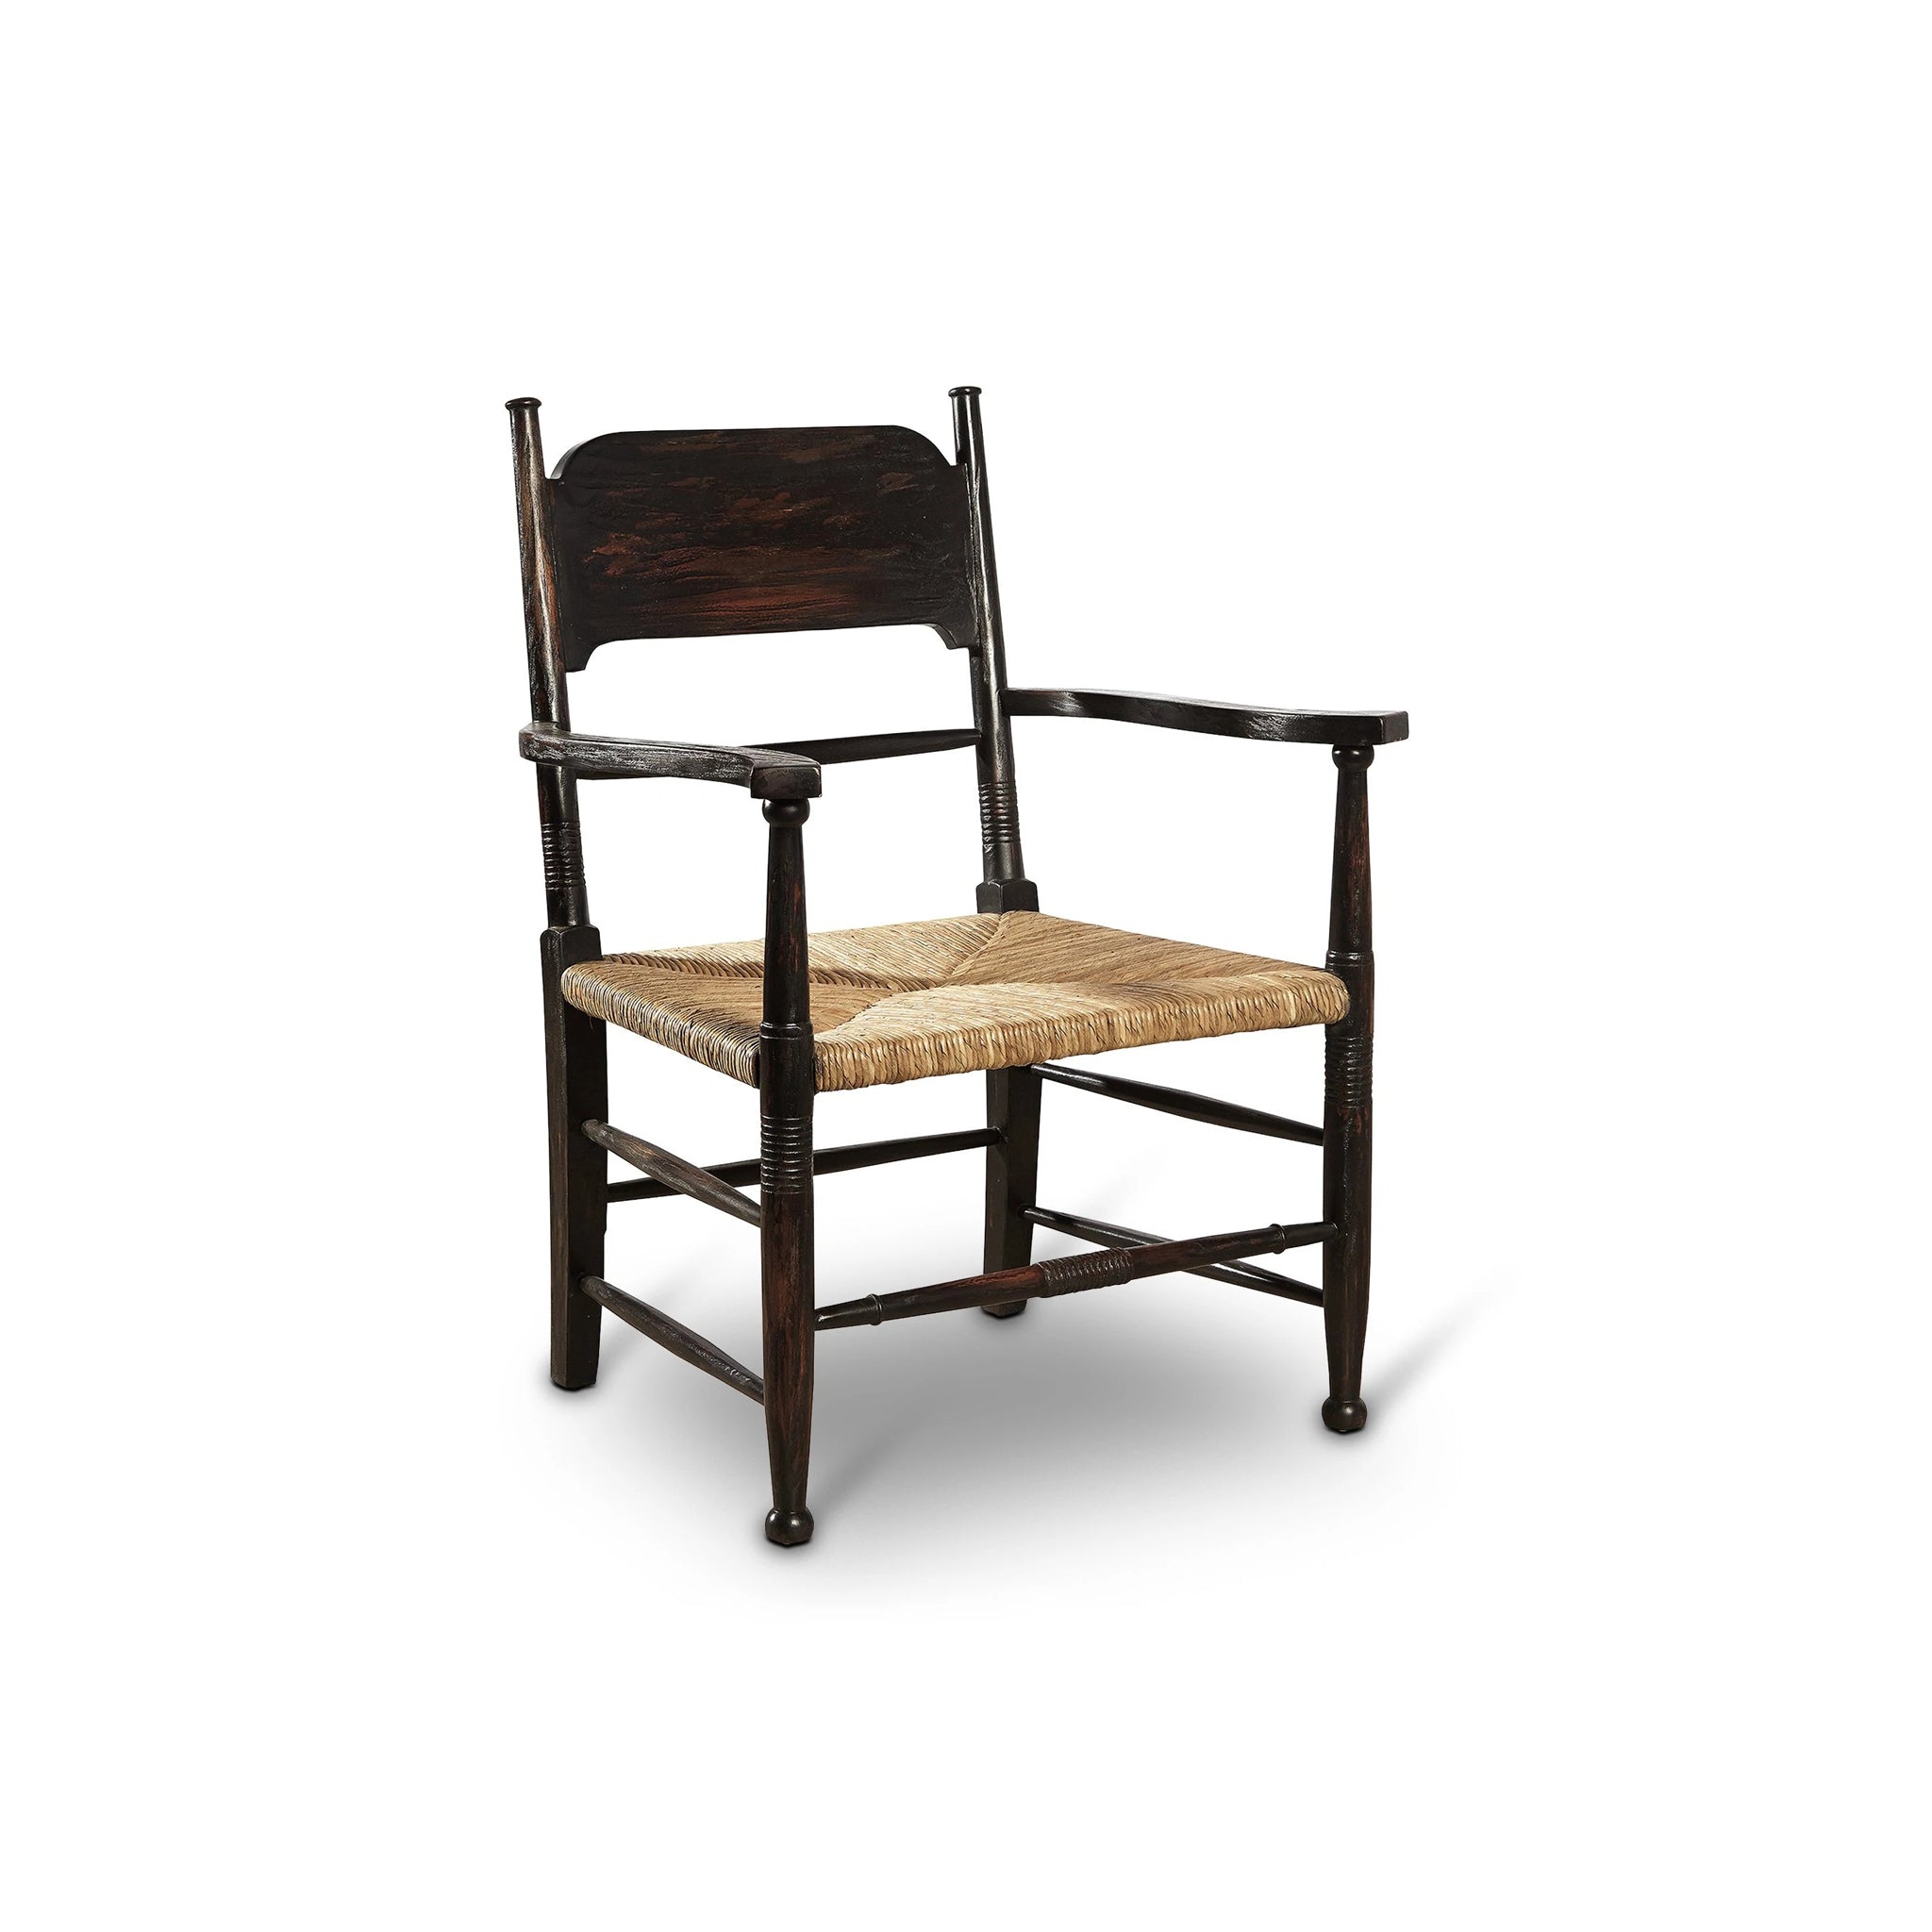 Isometric View of the Berkshire Chair on White Background